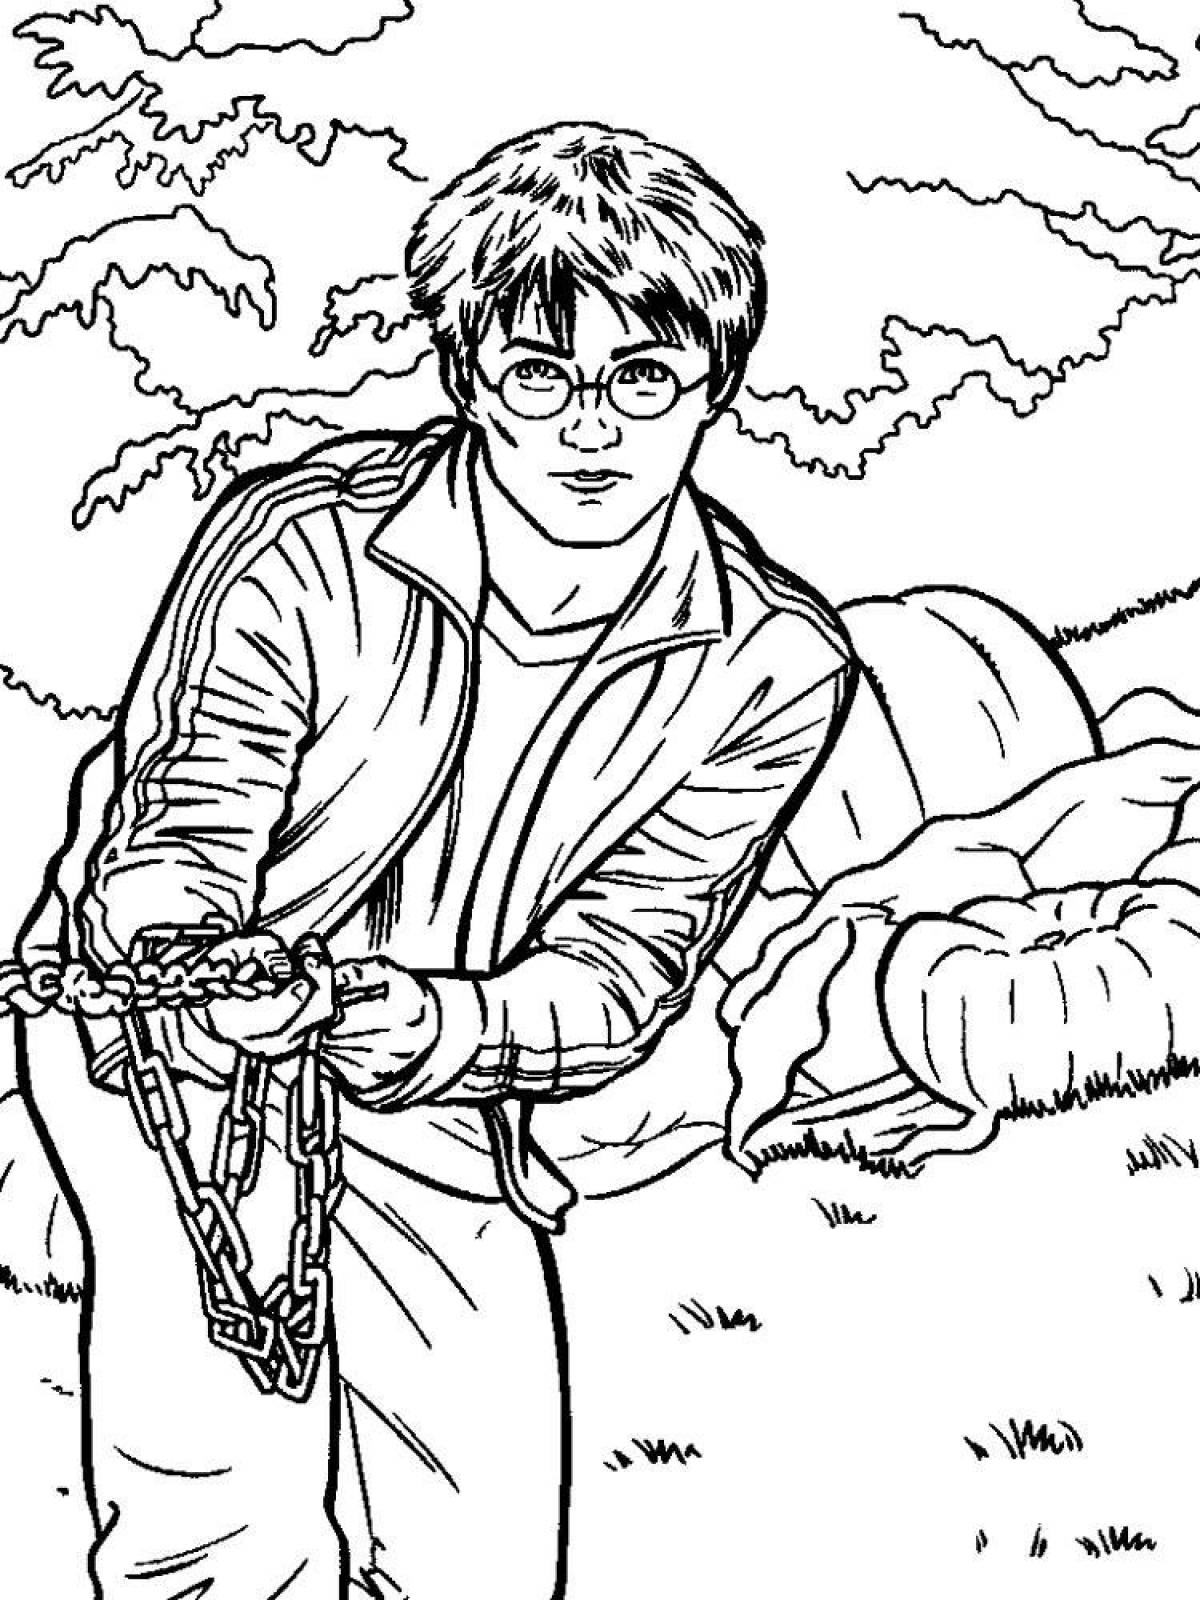 Harry potter bright coloring